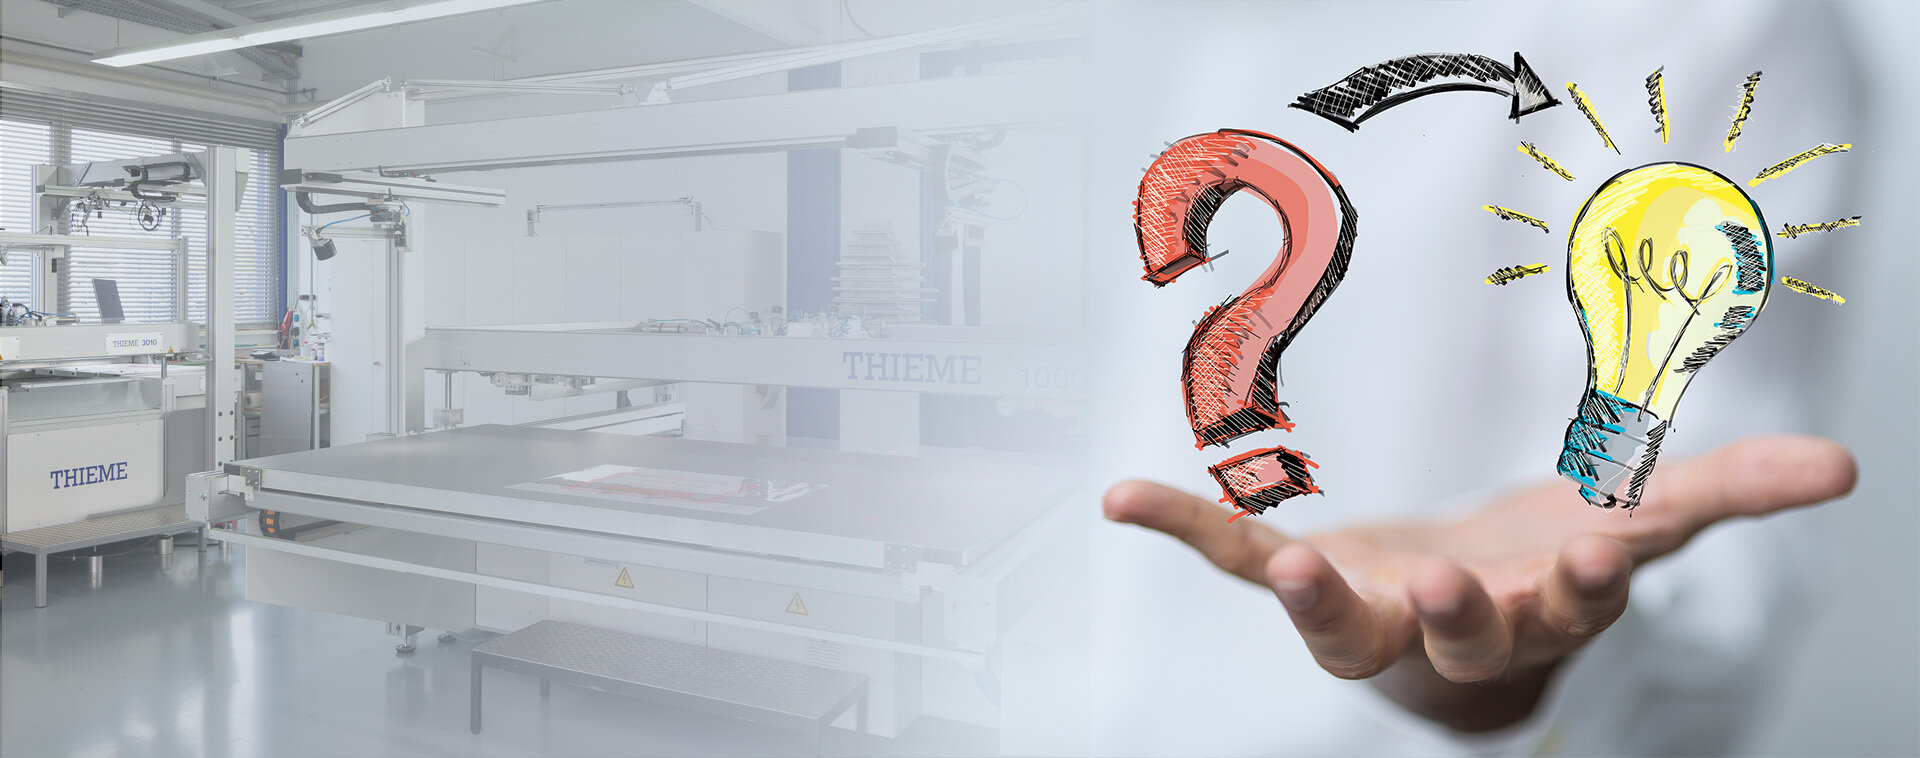 You want to print or coat your product?